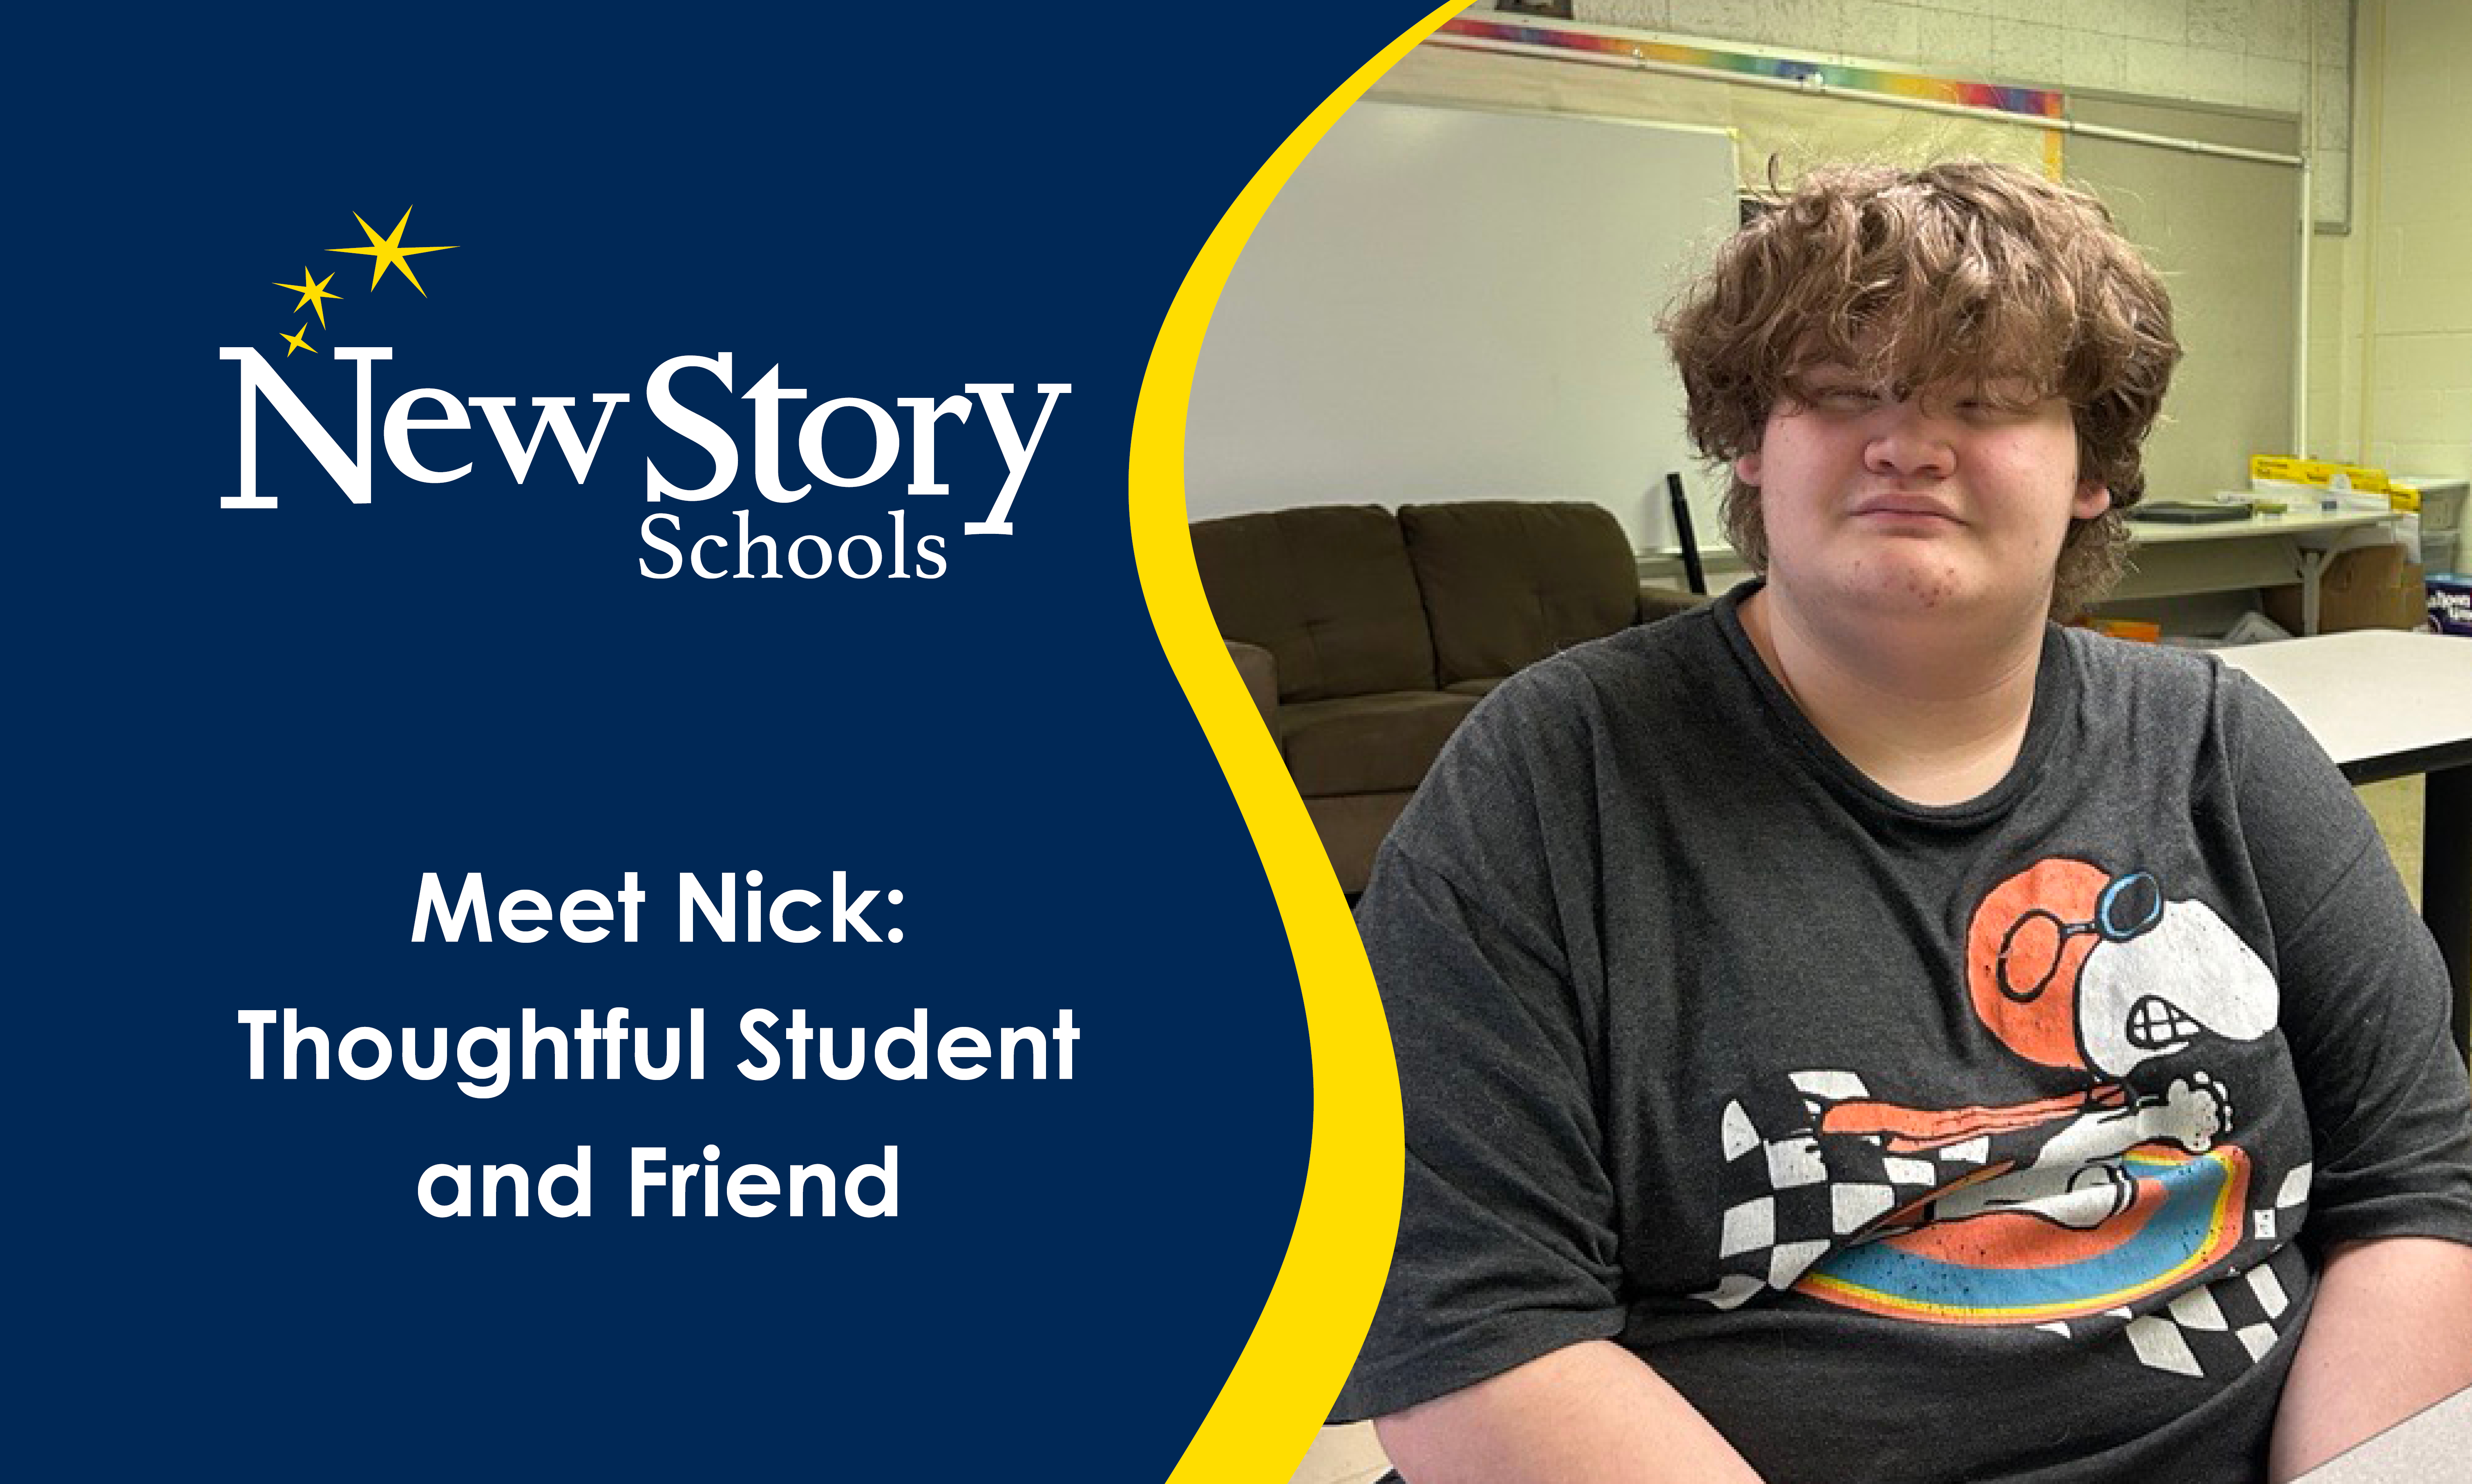 Meet Nick: Thoughtful Student and Friend